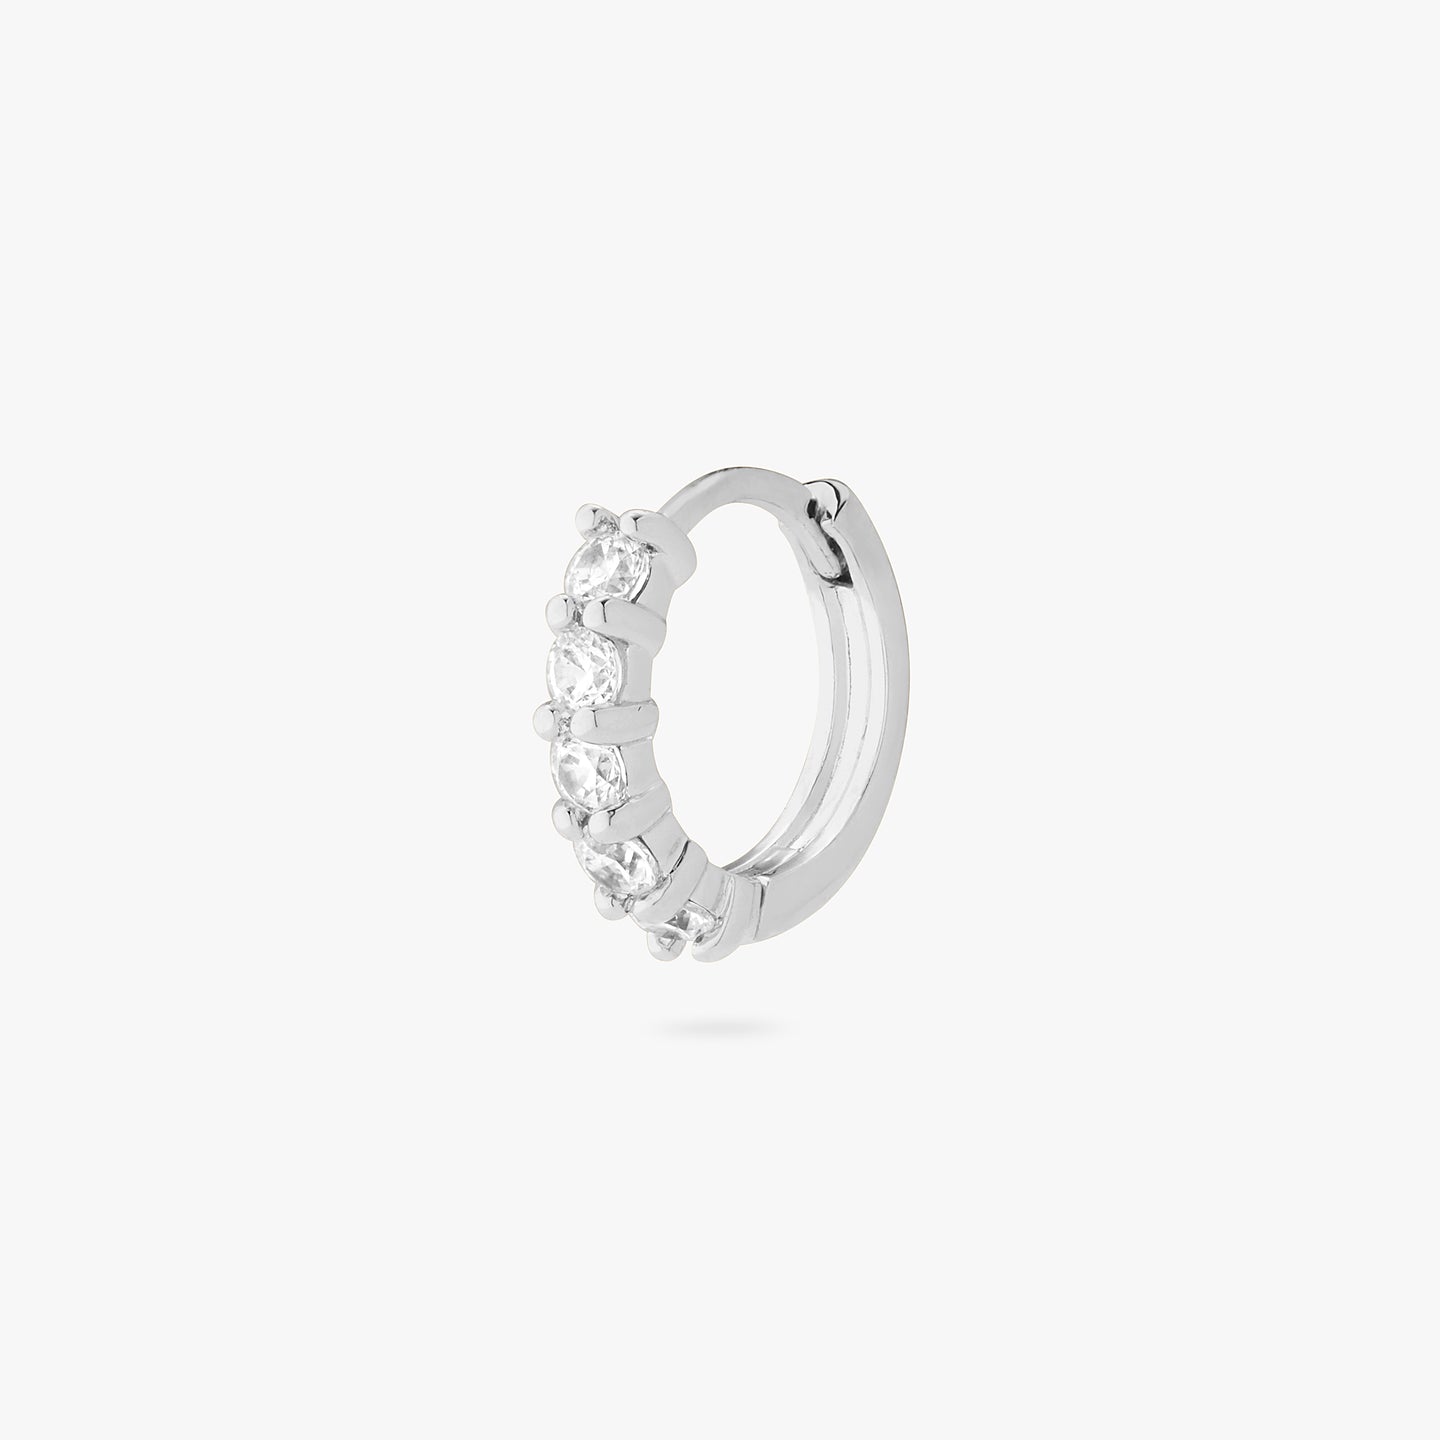 An image of a silver/clear pave huggie with max pave stones. color:null|silver/clear